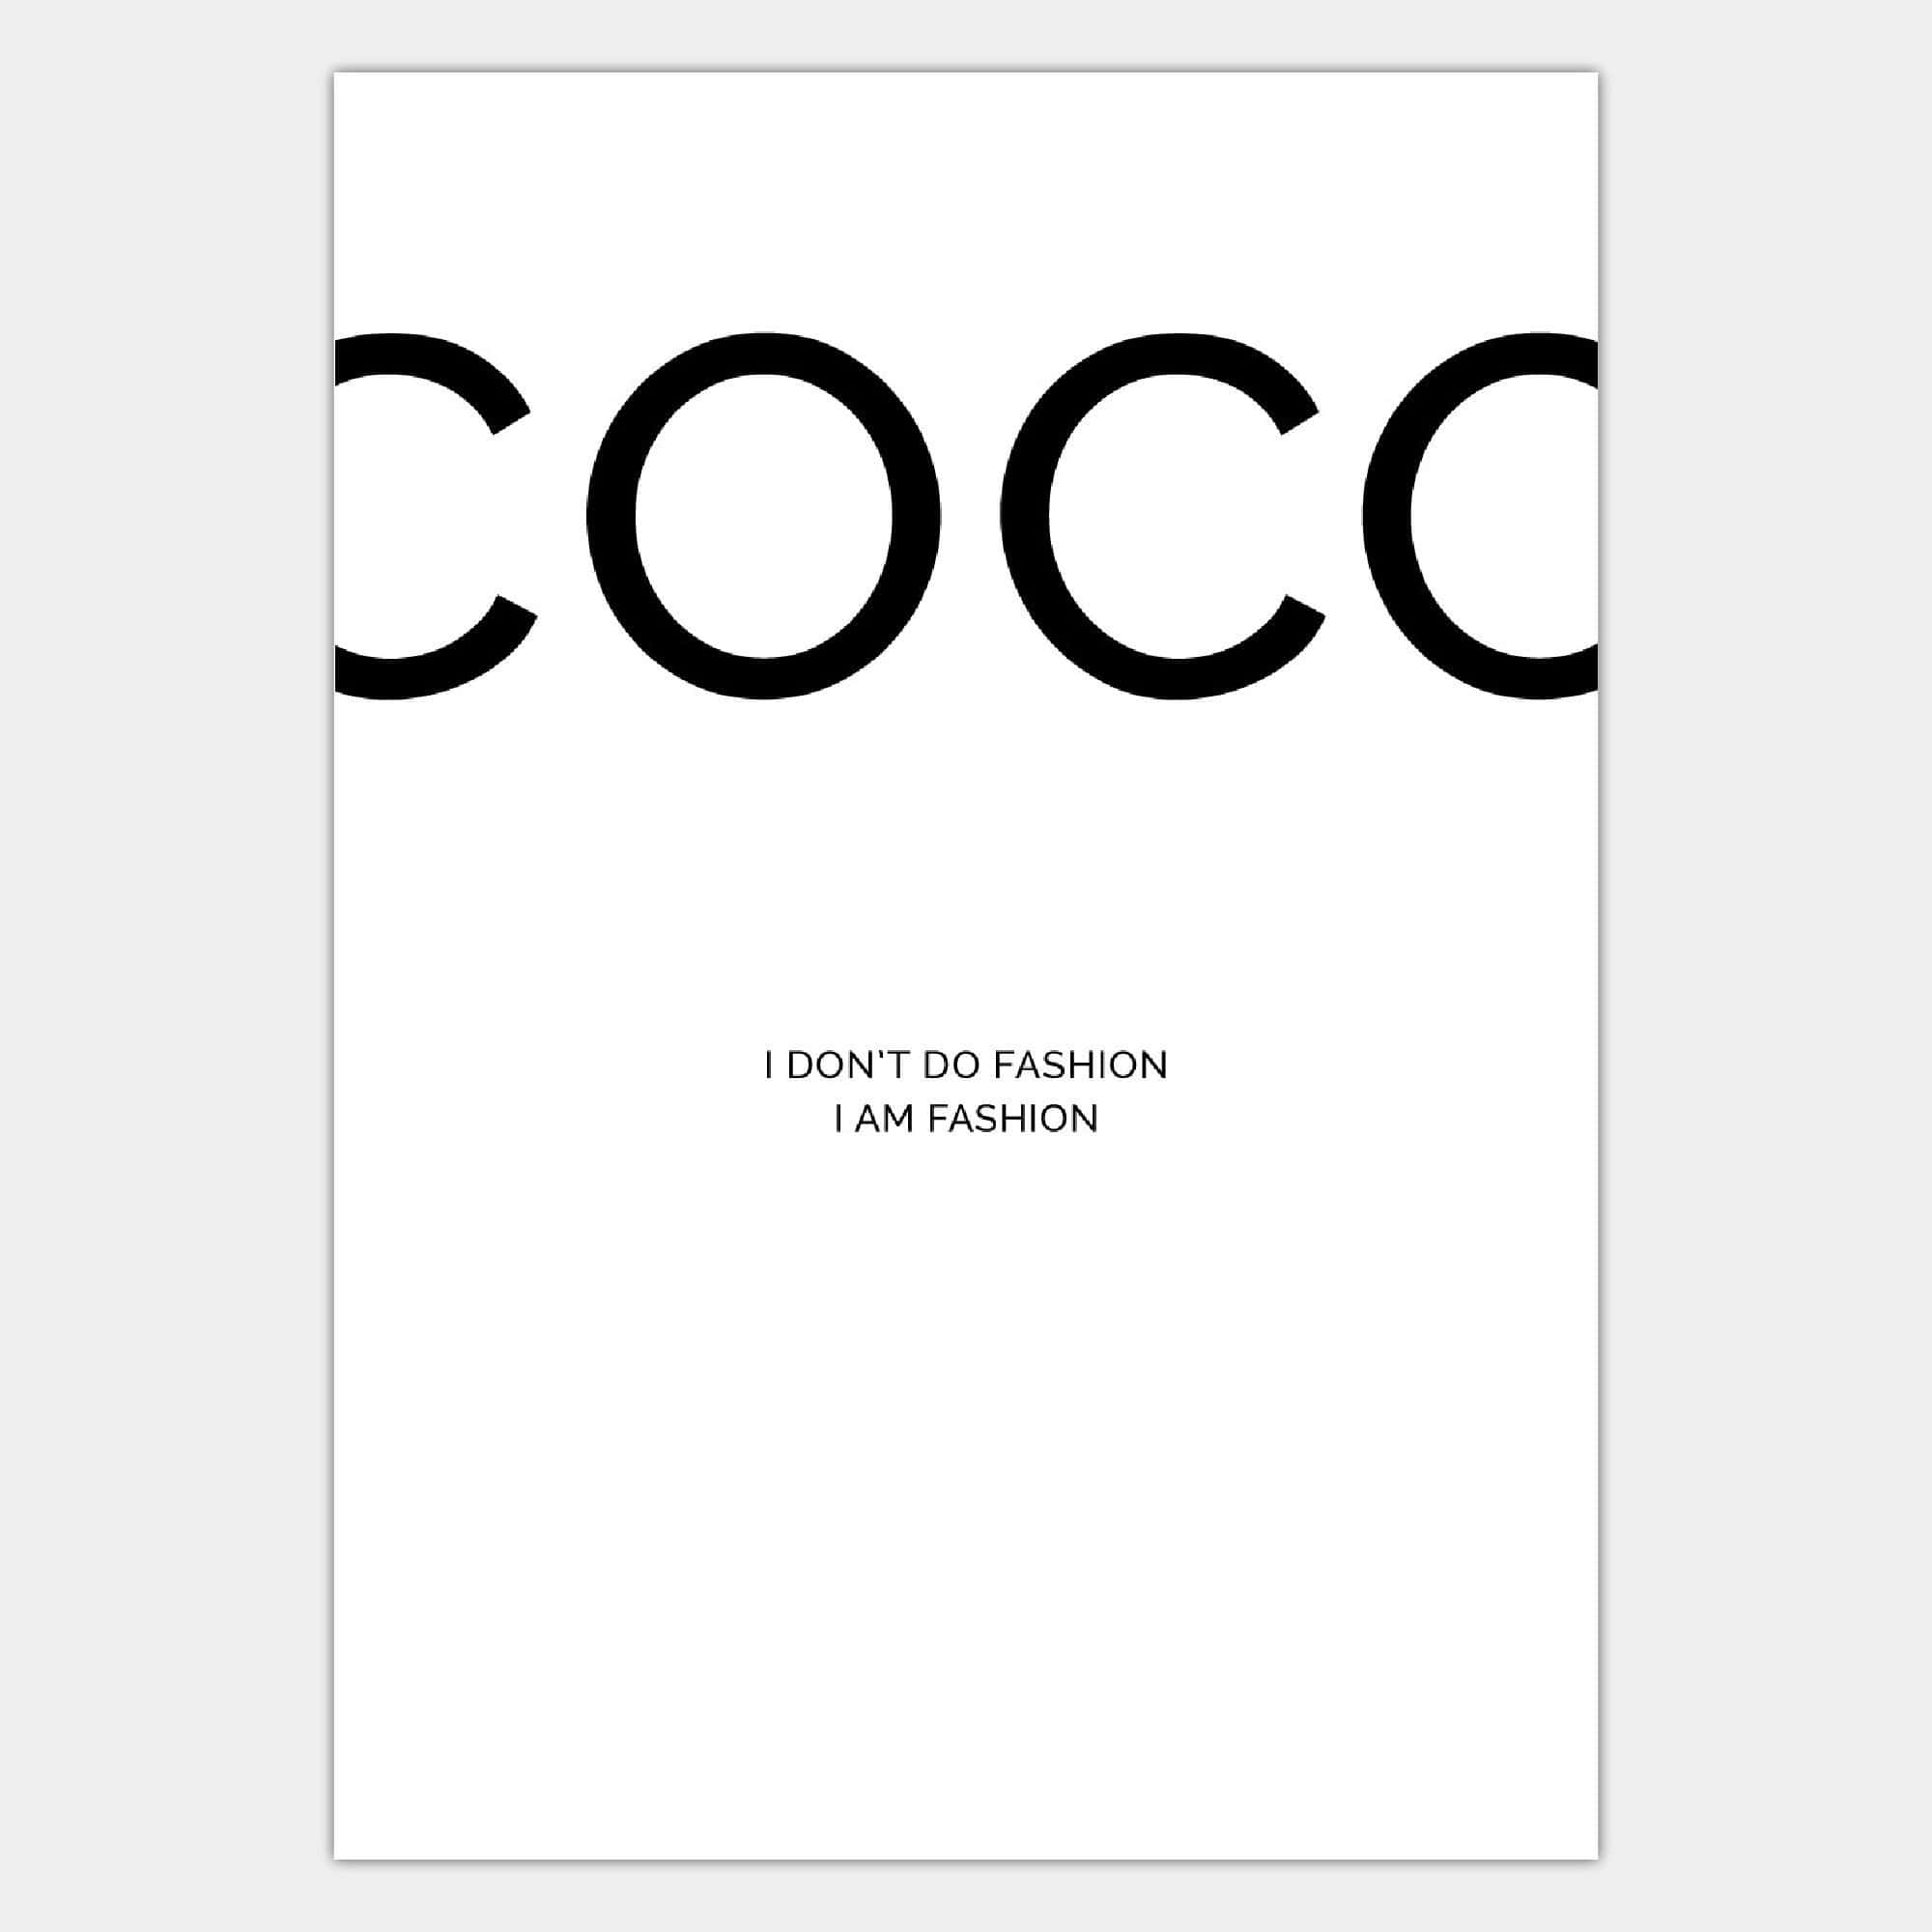 FASHION Set of 3 Black and White Coco Quote Vogue XOXO Marfa Noir Perfume Gallery Wall Art Print Picture Poster ARTZEUK